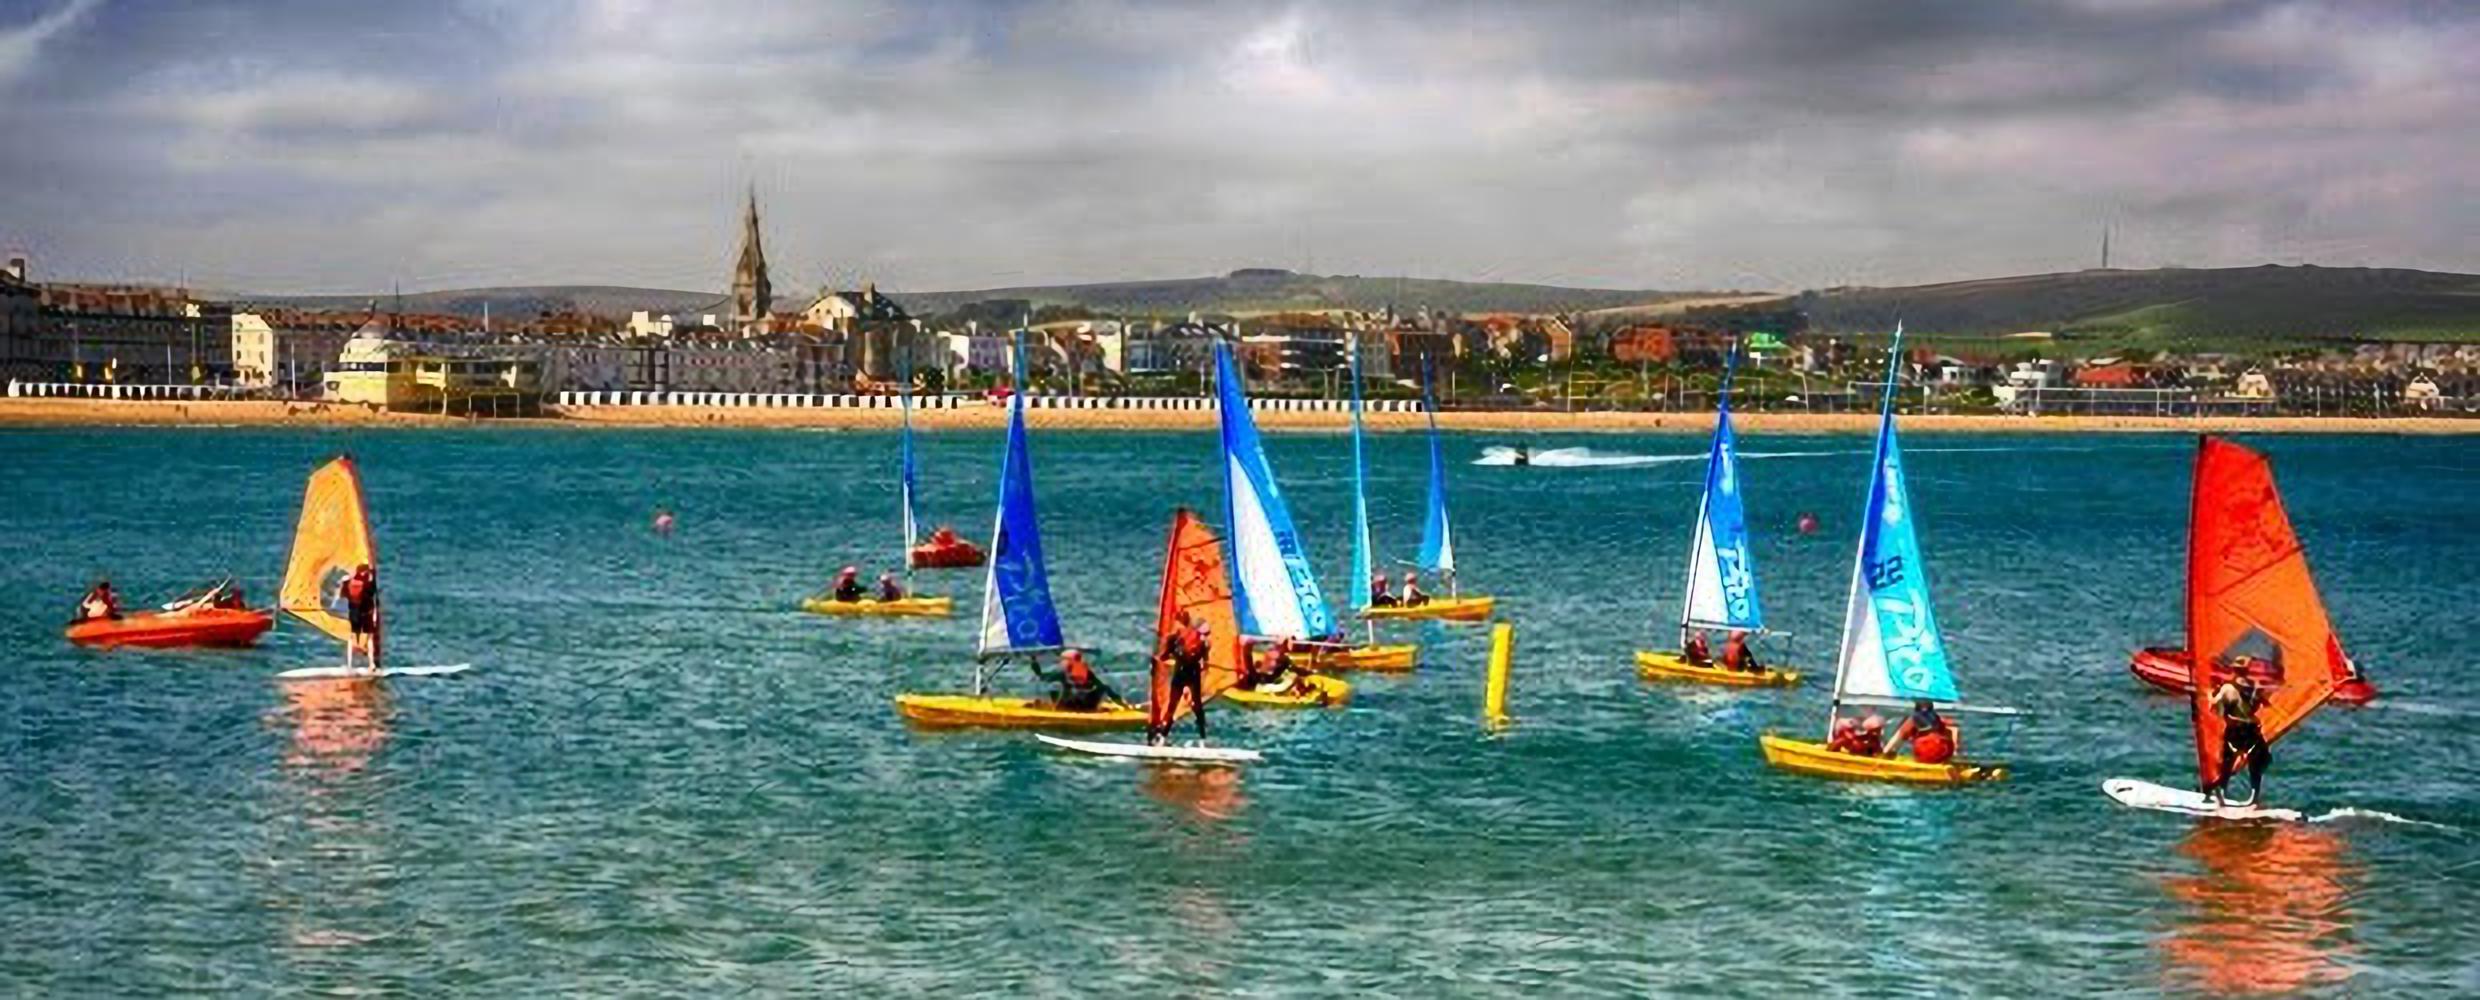 We are weymouth launches we are active summer campaign